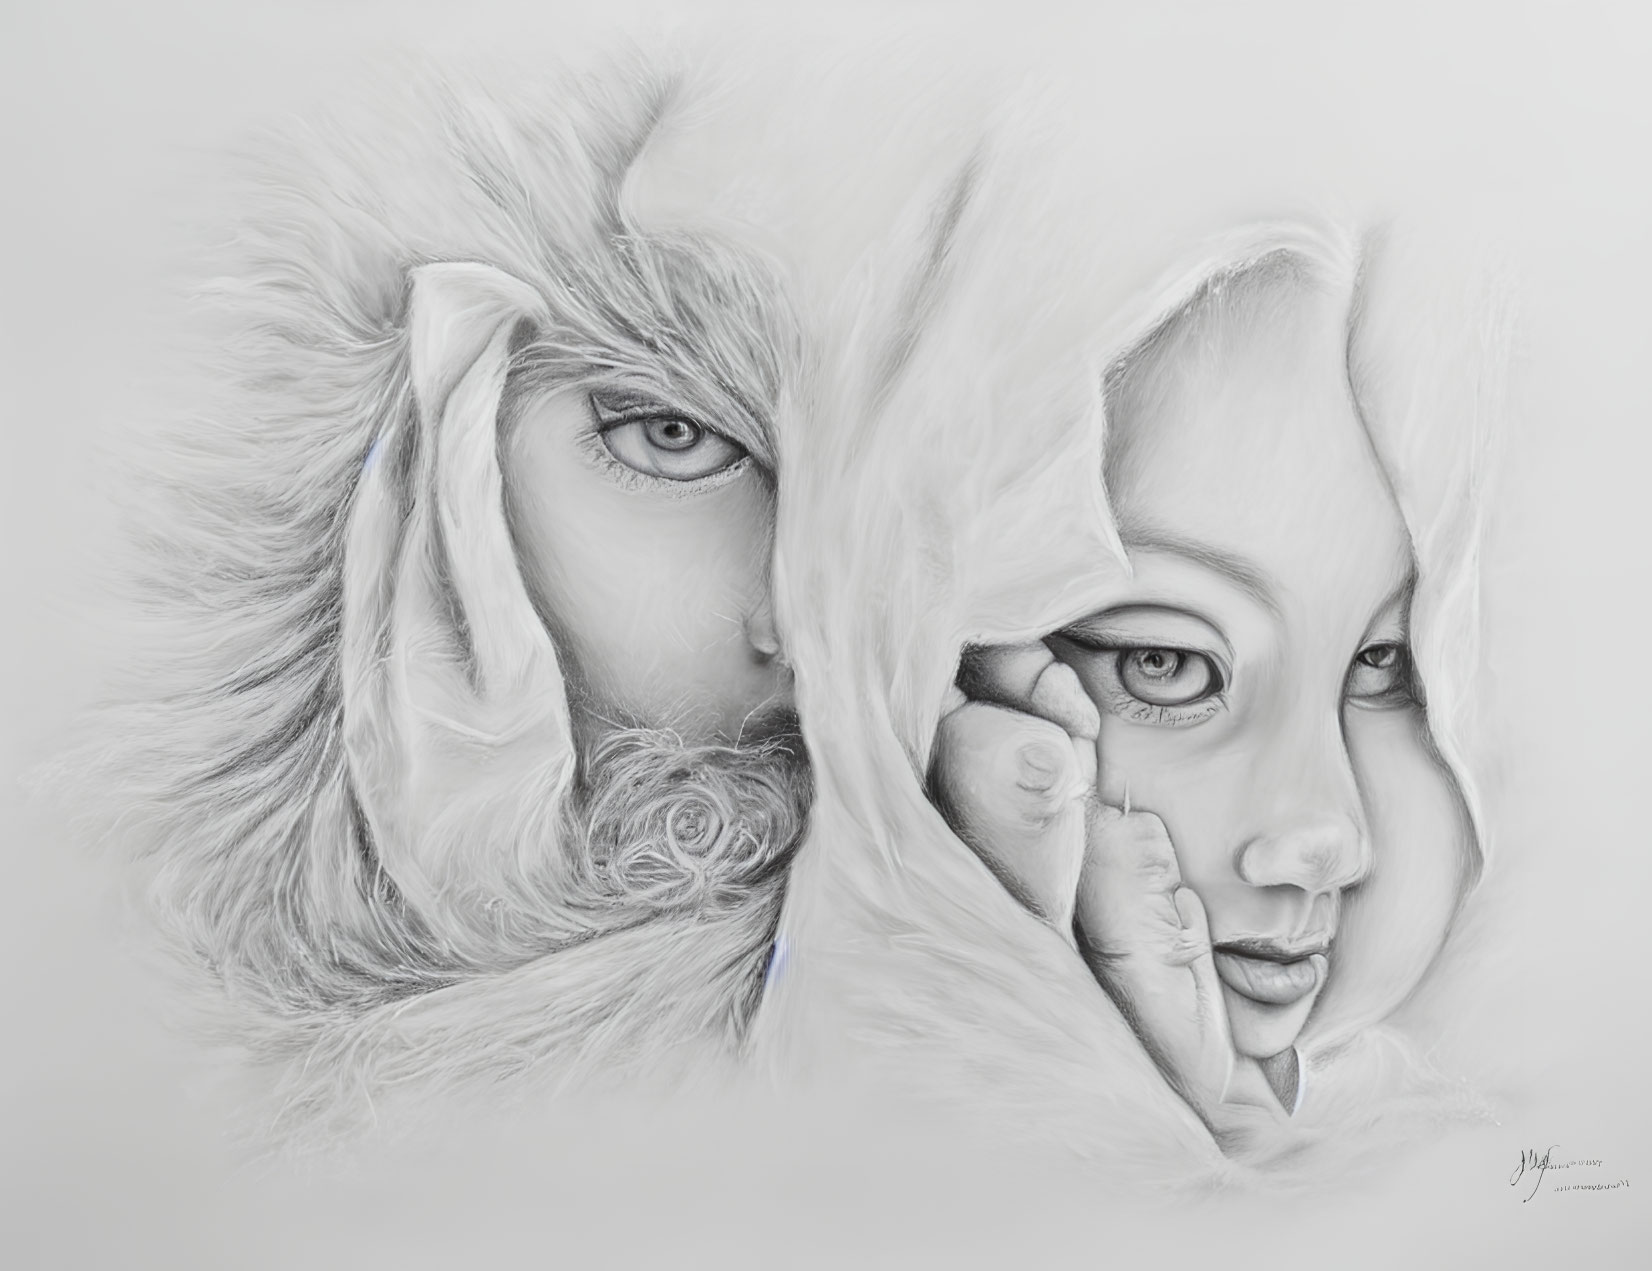 Monochromatic pencil drawing of man and young girl blending human and animal elements